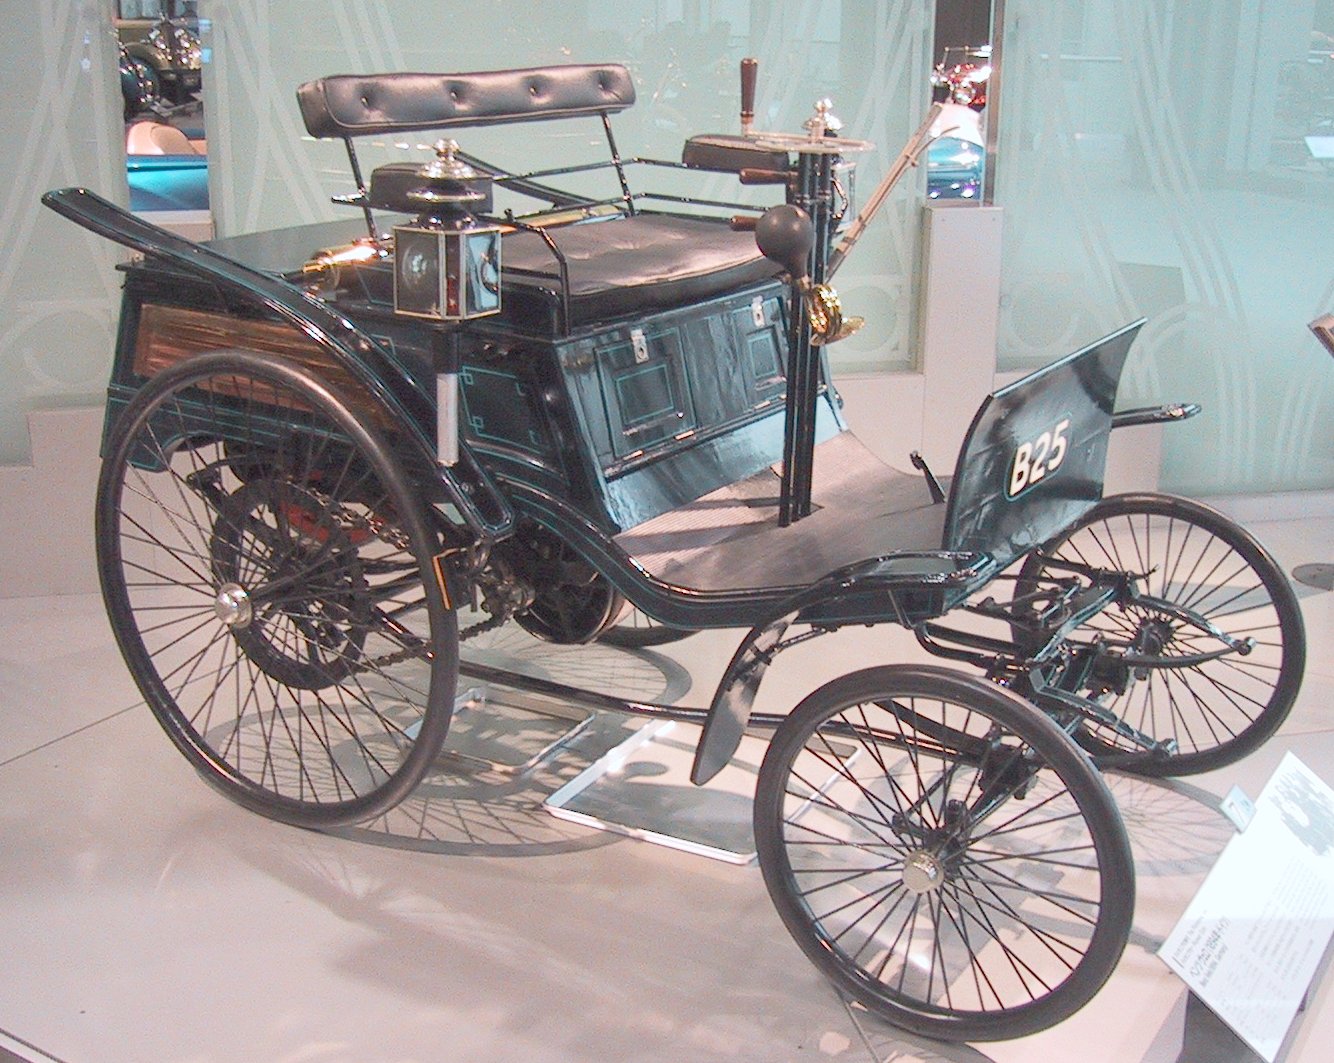 Benz 1640 tourer Photo Gallery: Photo #10 out of 8, Image Size ...